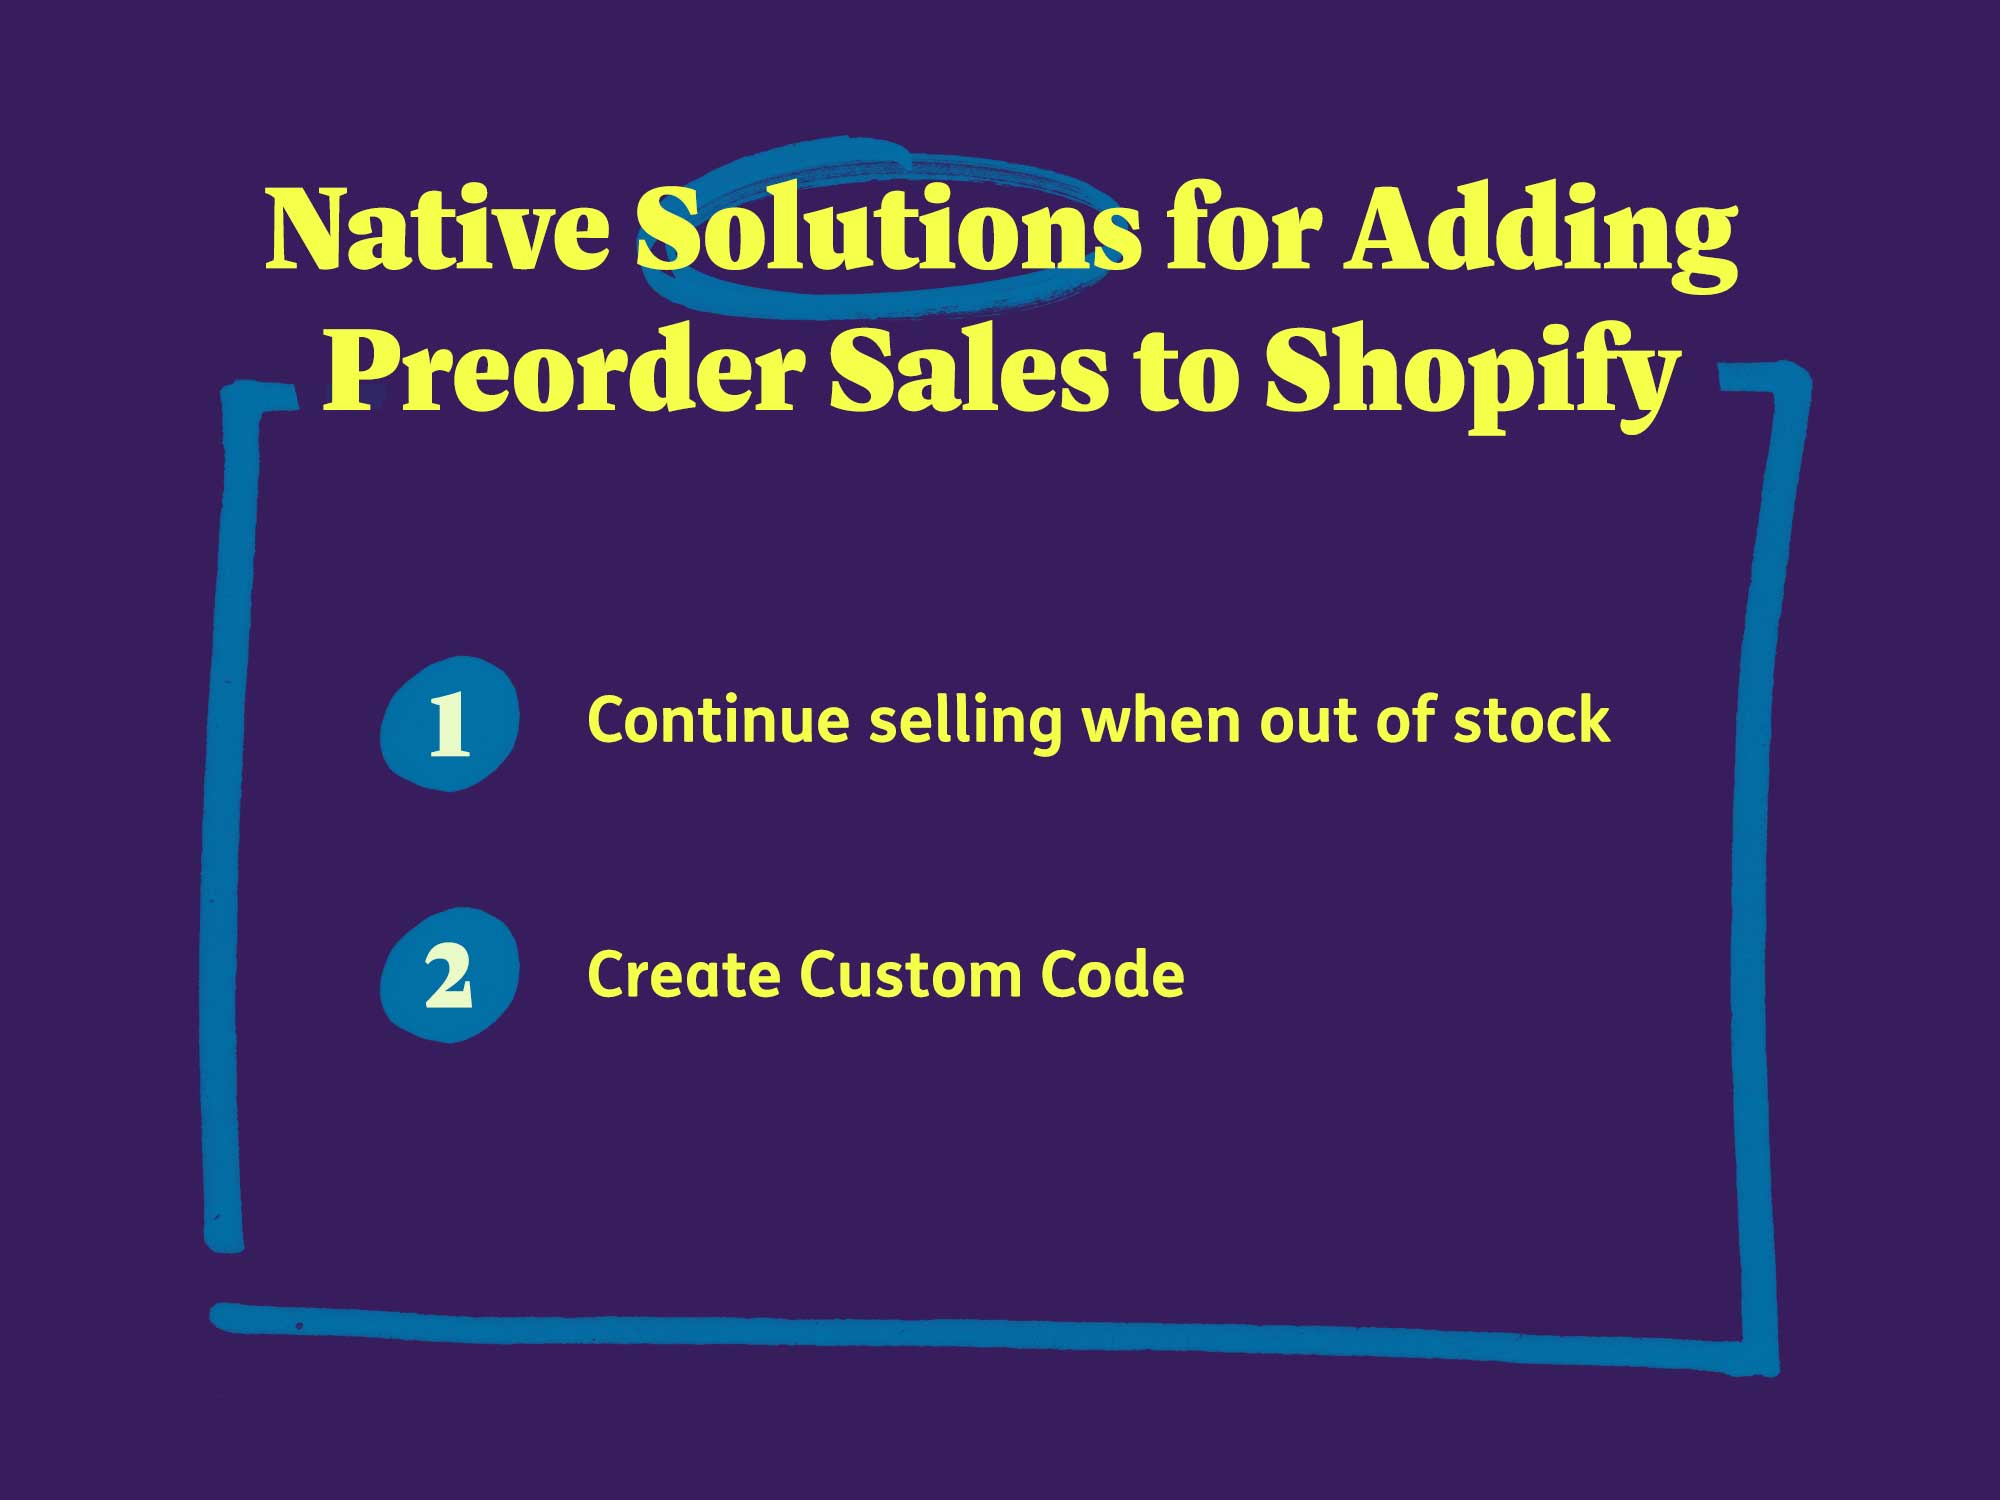 Native Solutions for Adding Preorder Sales to Shopify: Continue selling when out of stock or create custom code.